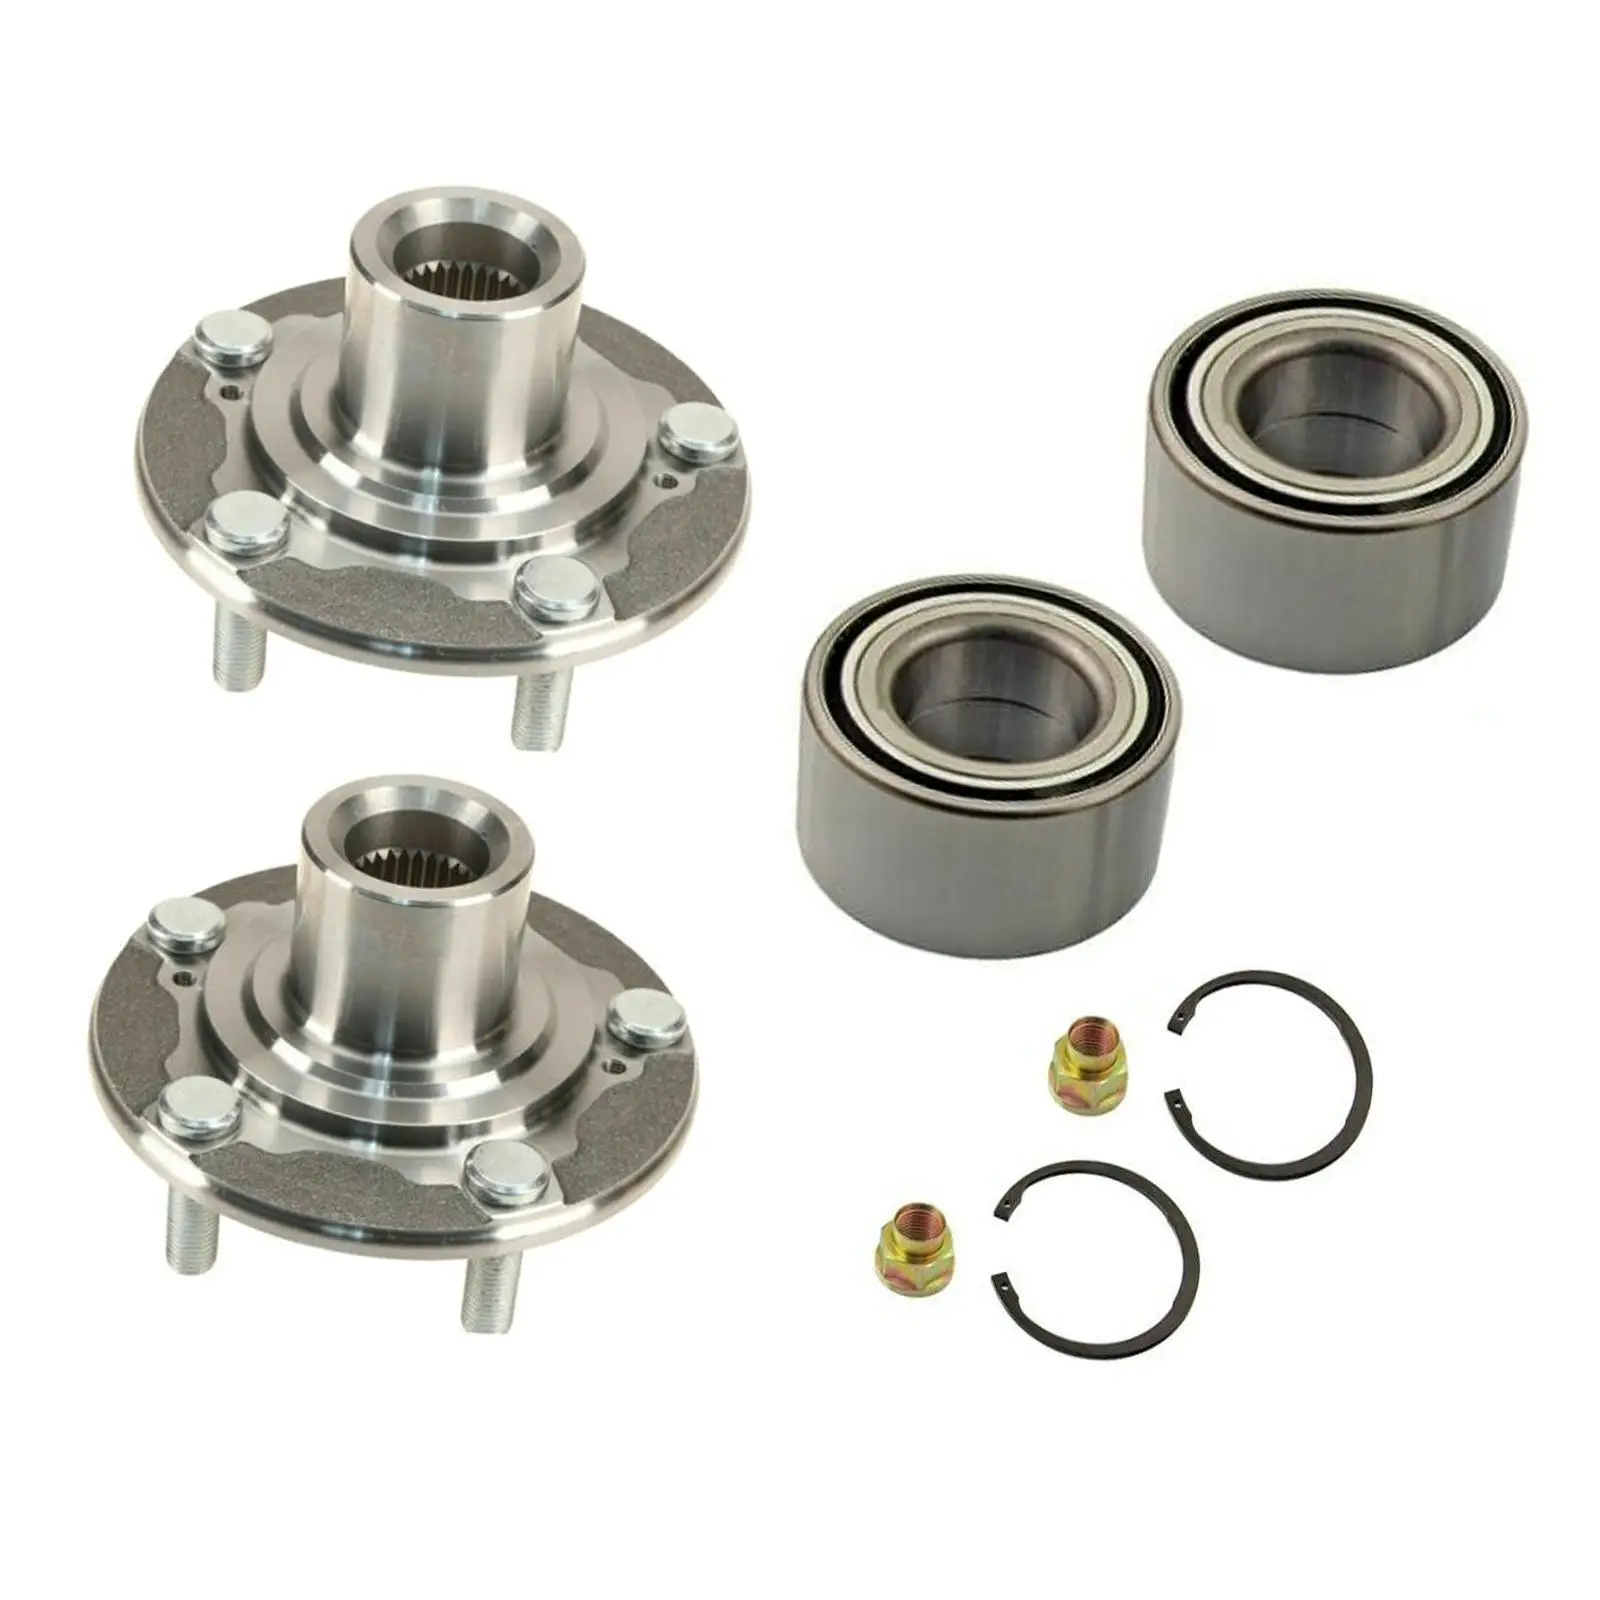 2Pcs Front Wheel Hub Bearing Kits Assembly Professional Replacement Spare Parts Left and Right for Honda Accord 2013-2017